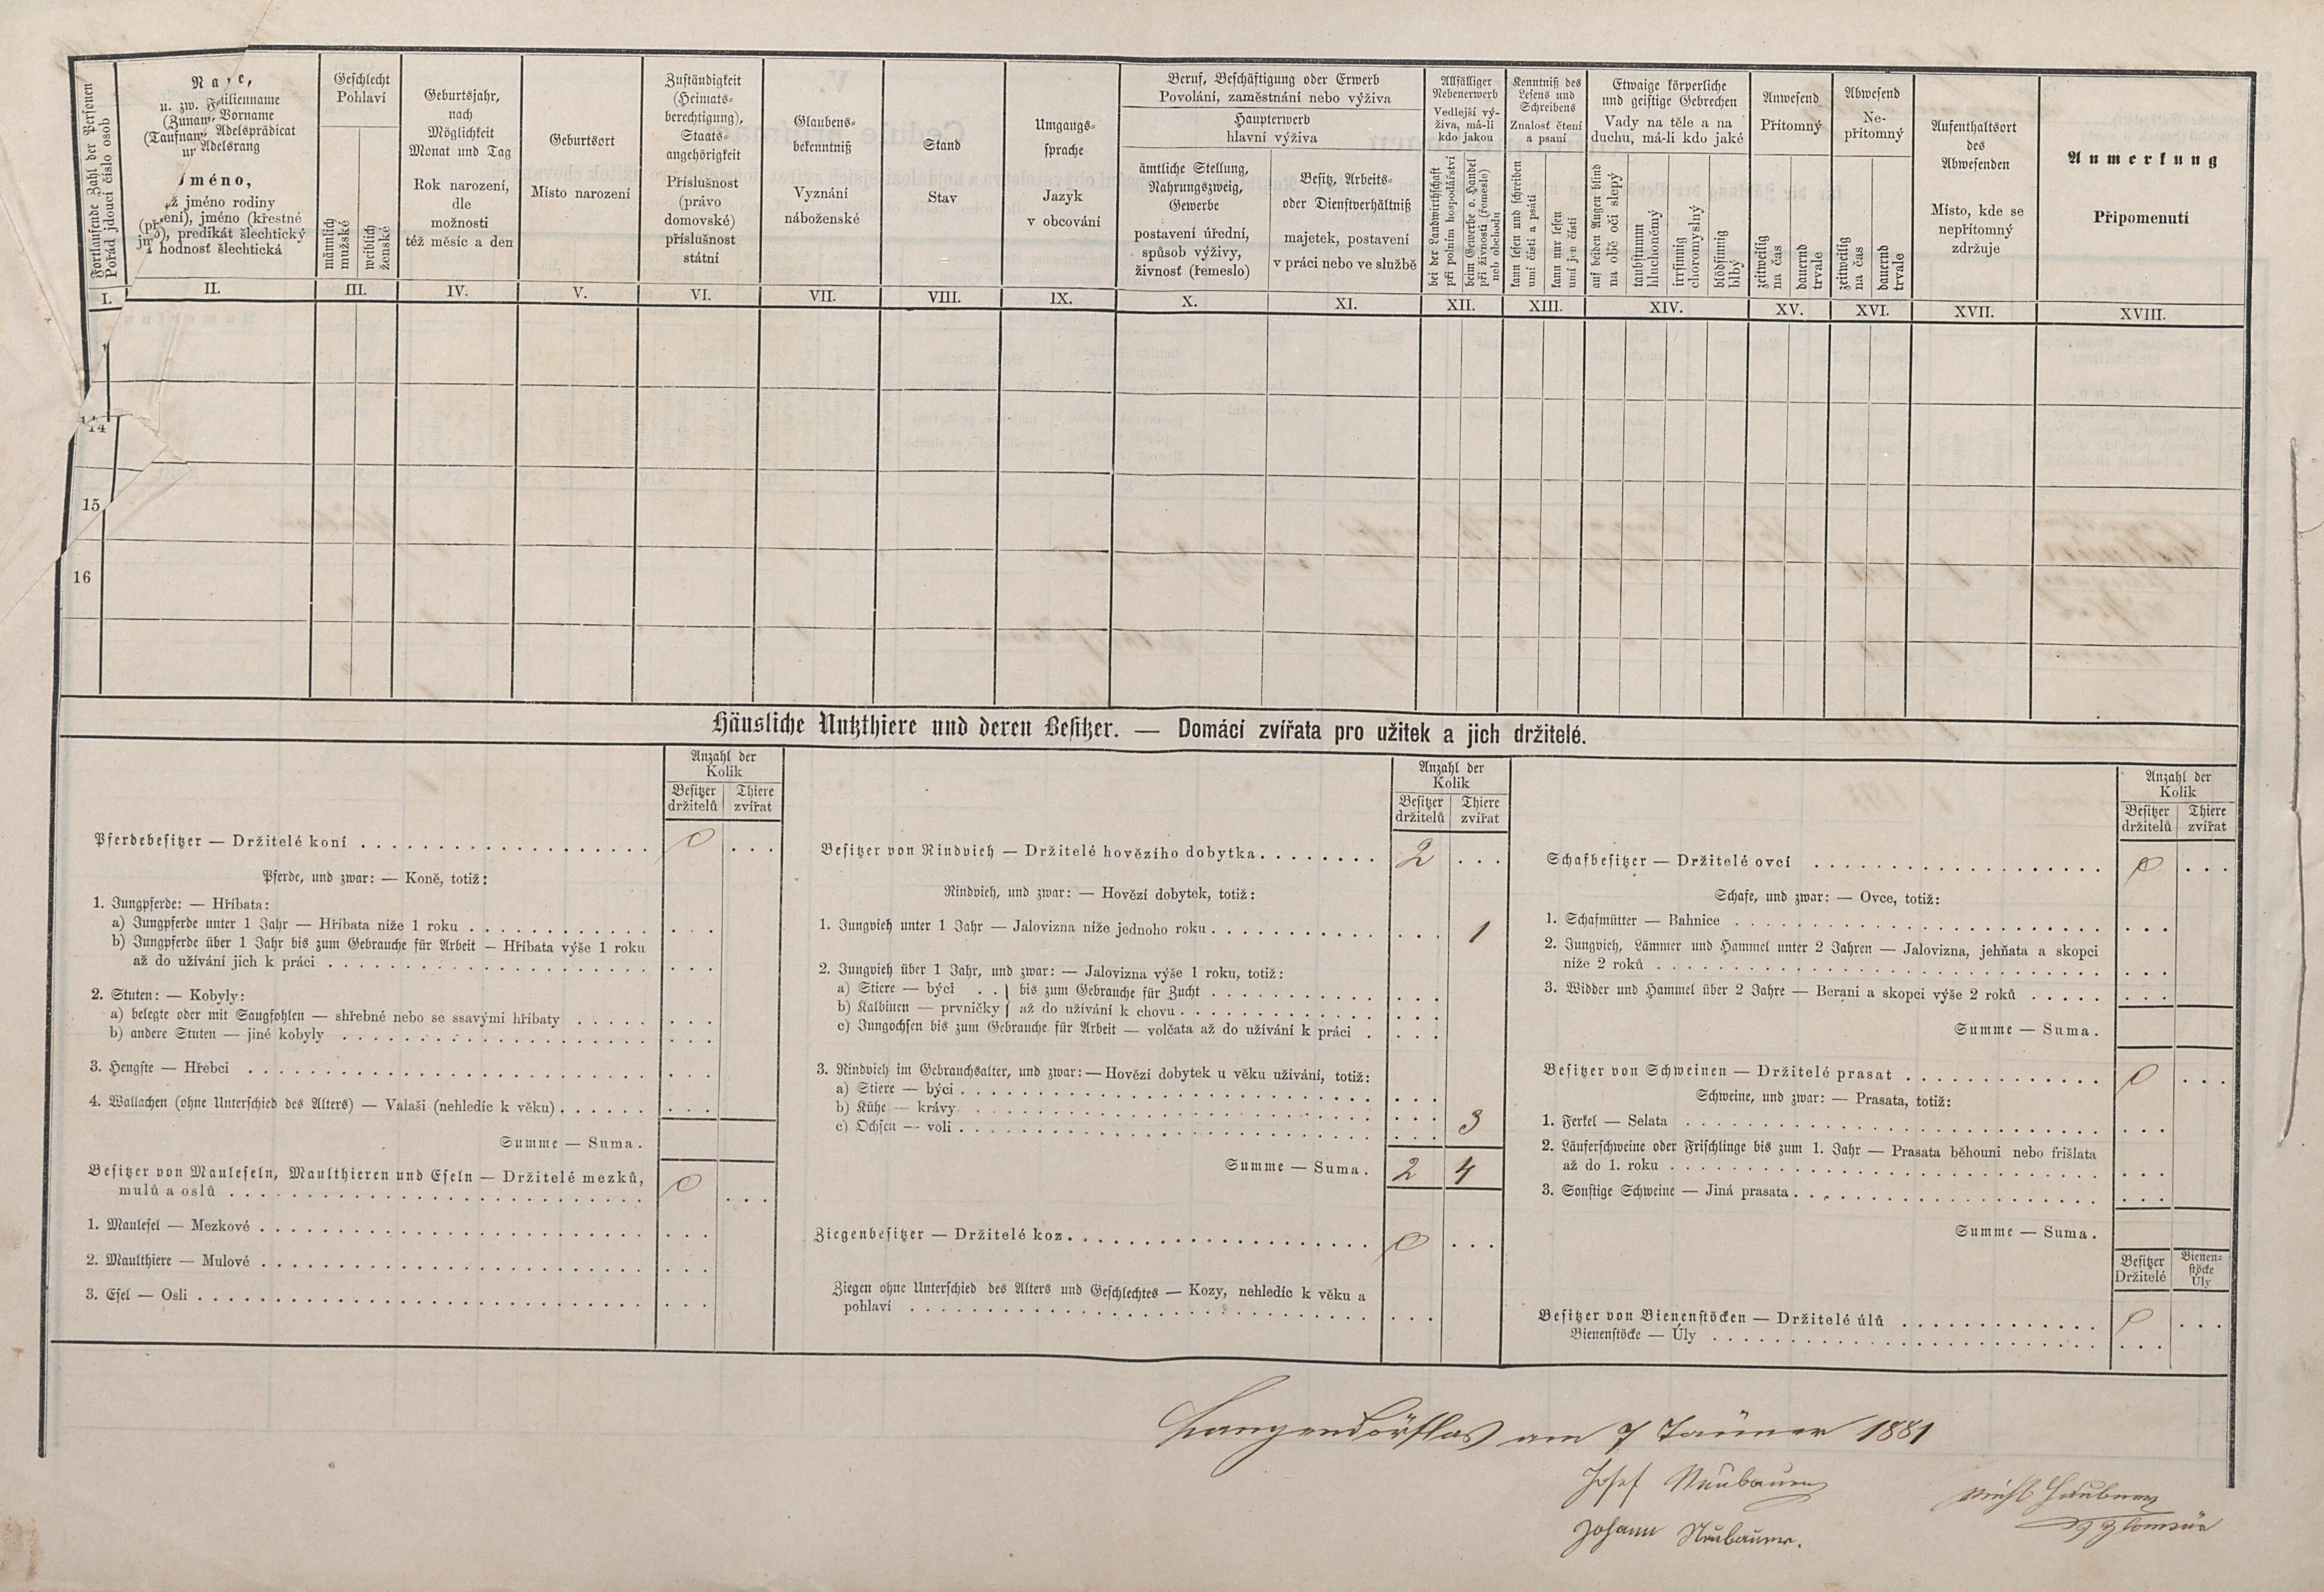 4. soap-tc_00192_census-1880-dlouhy-ujezd-cp007_0040